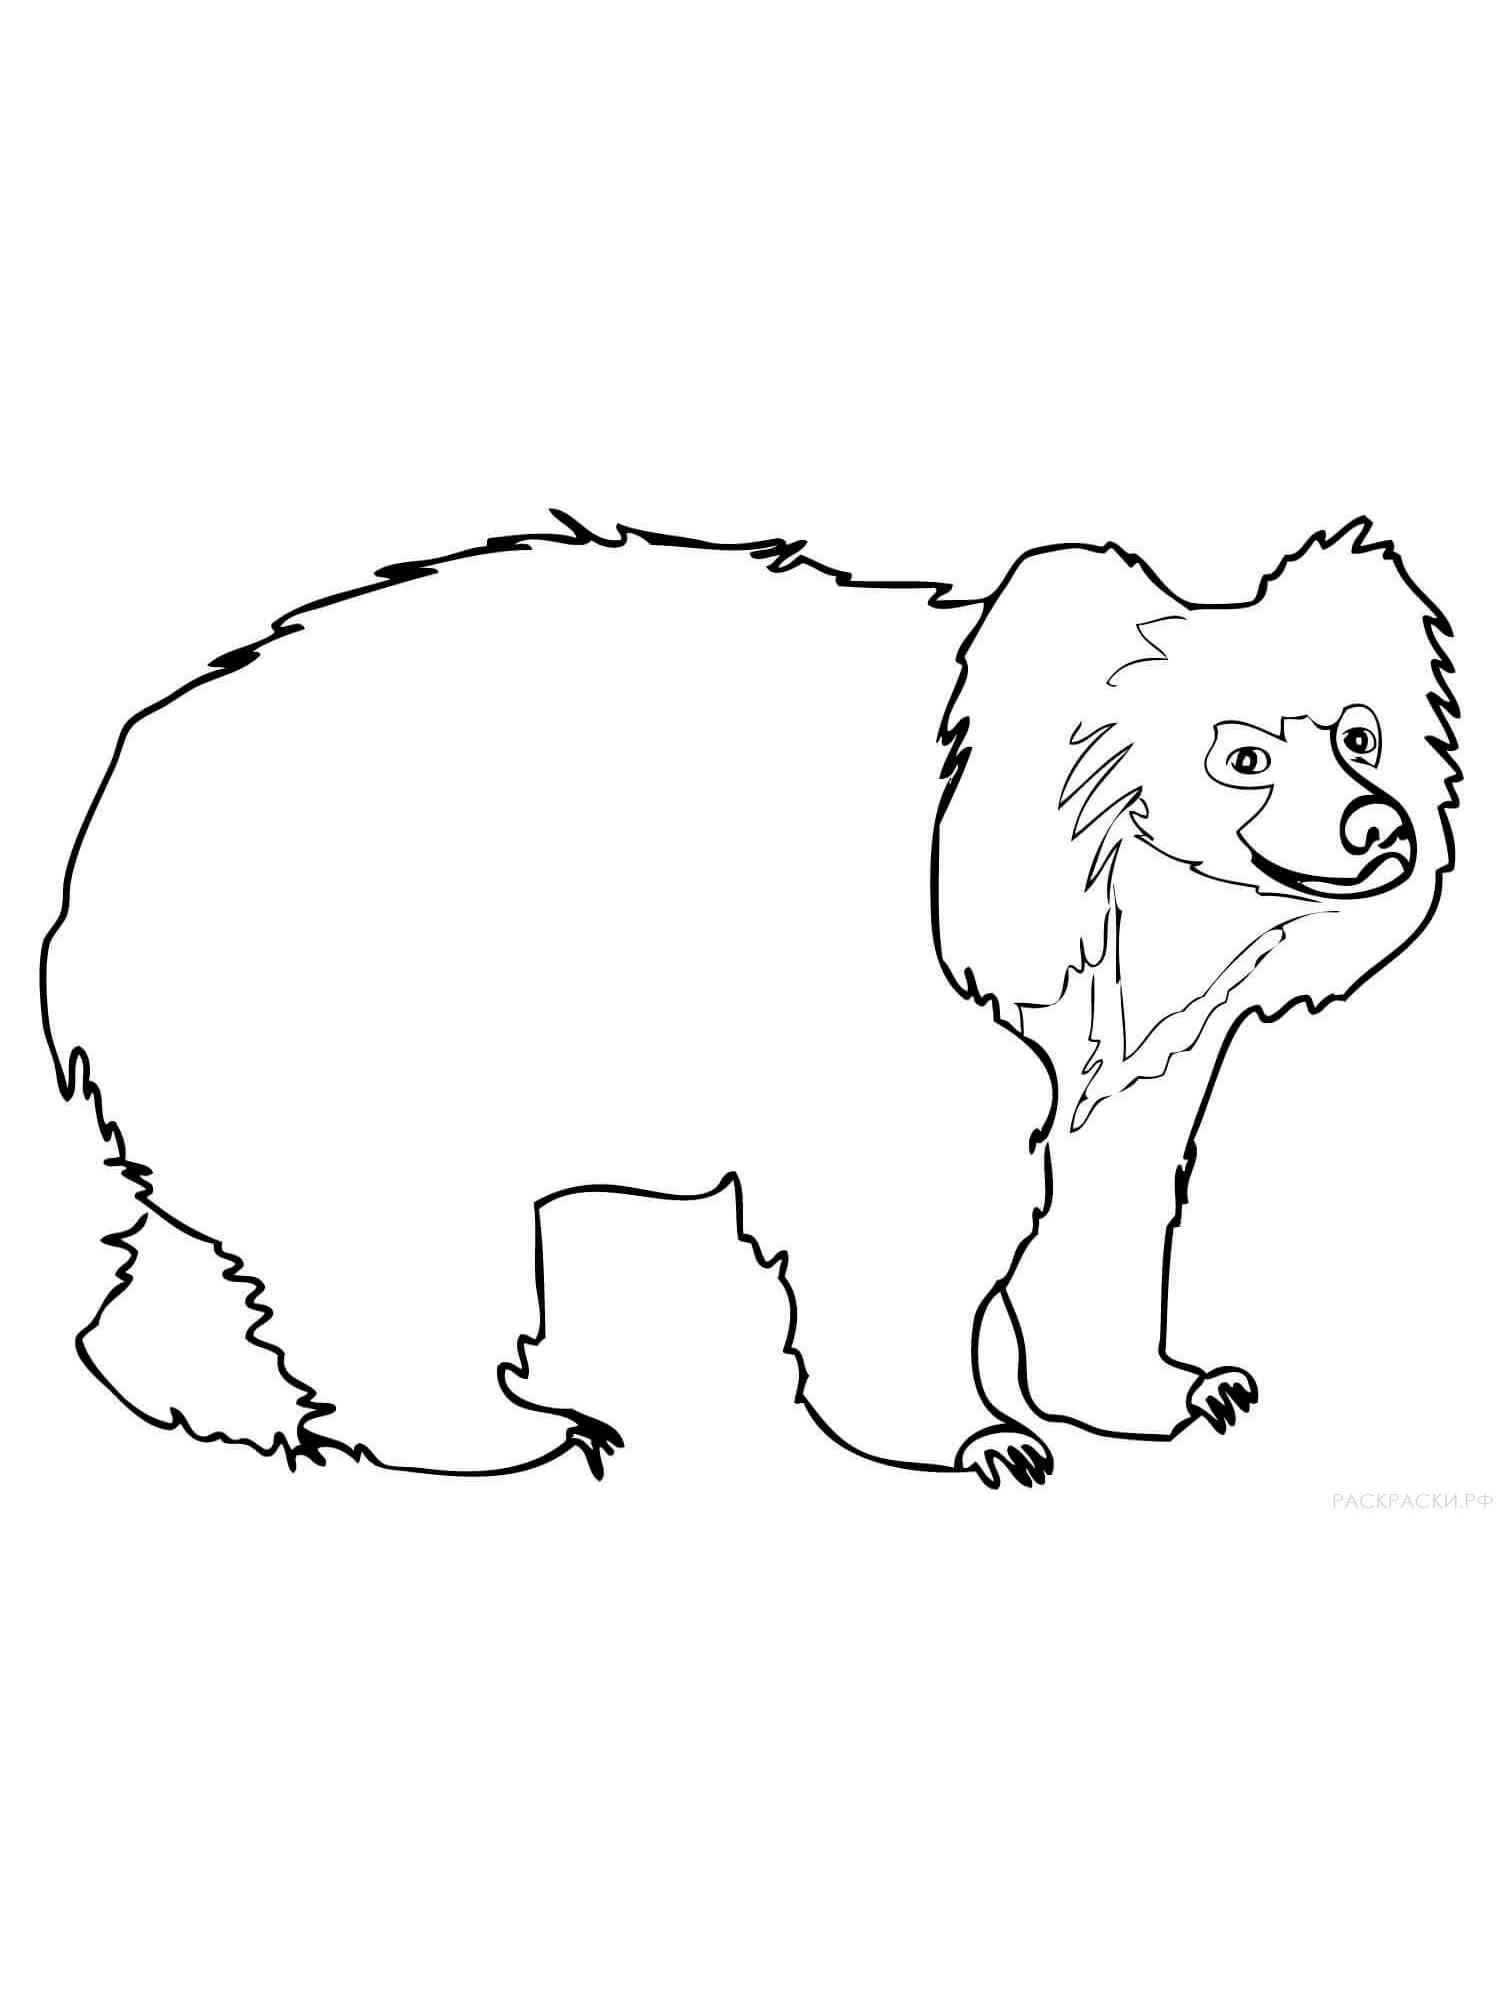 Simple Sloth Bear coloring page